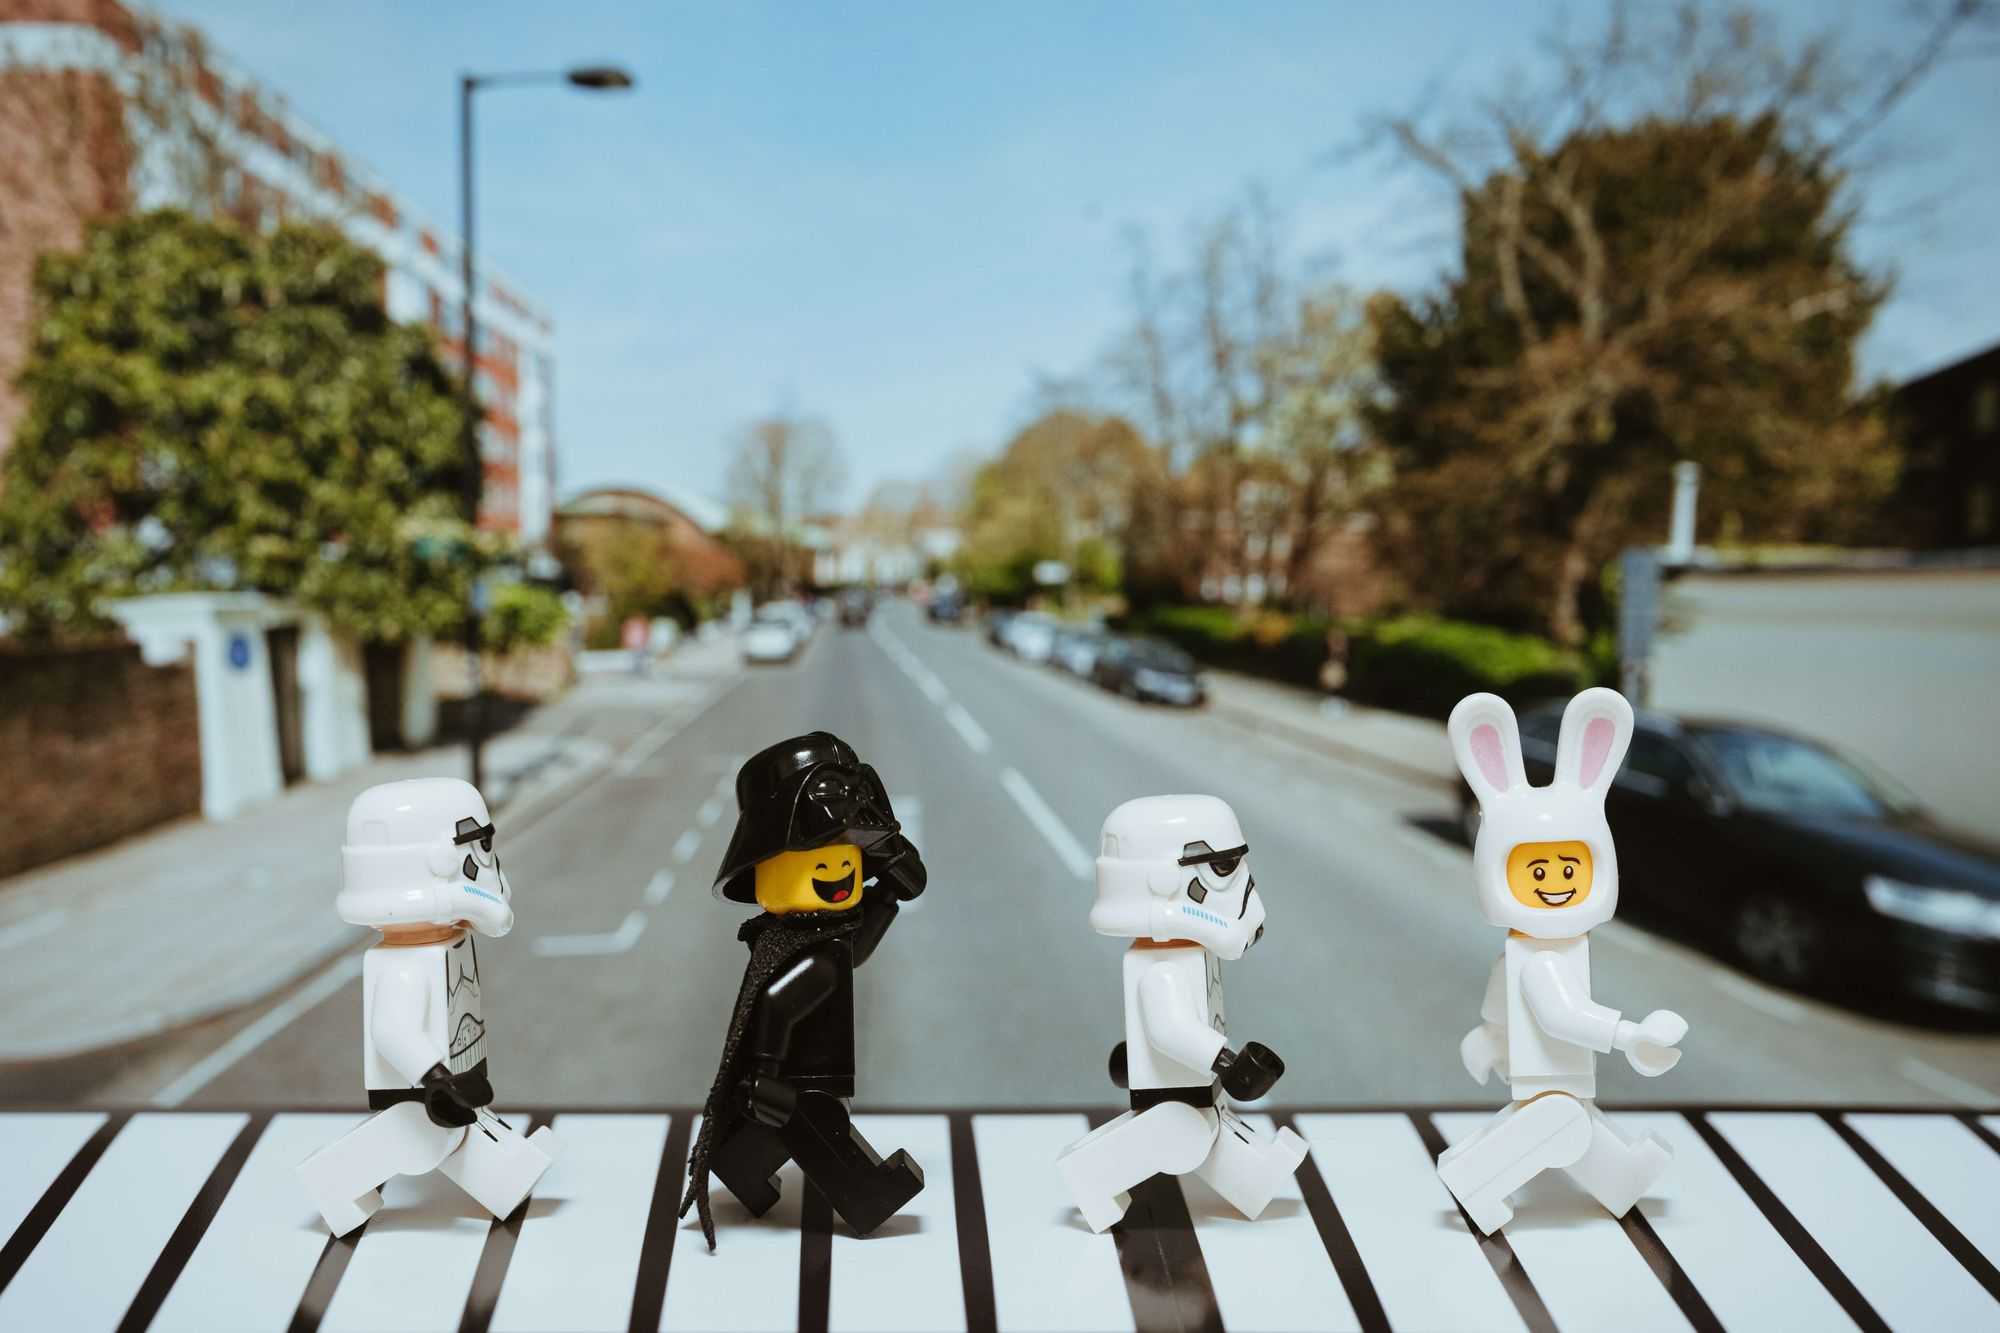 star wars LEGOS posing as the beatles on abbey road